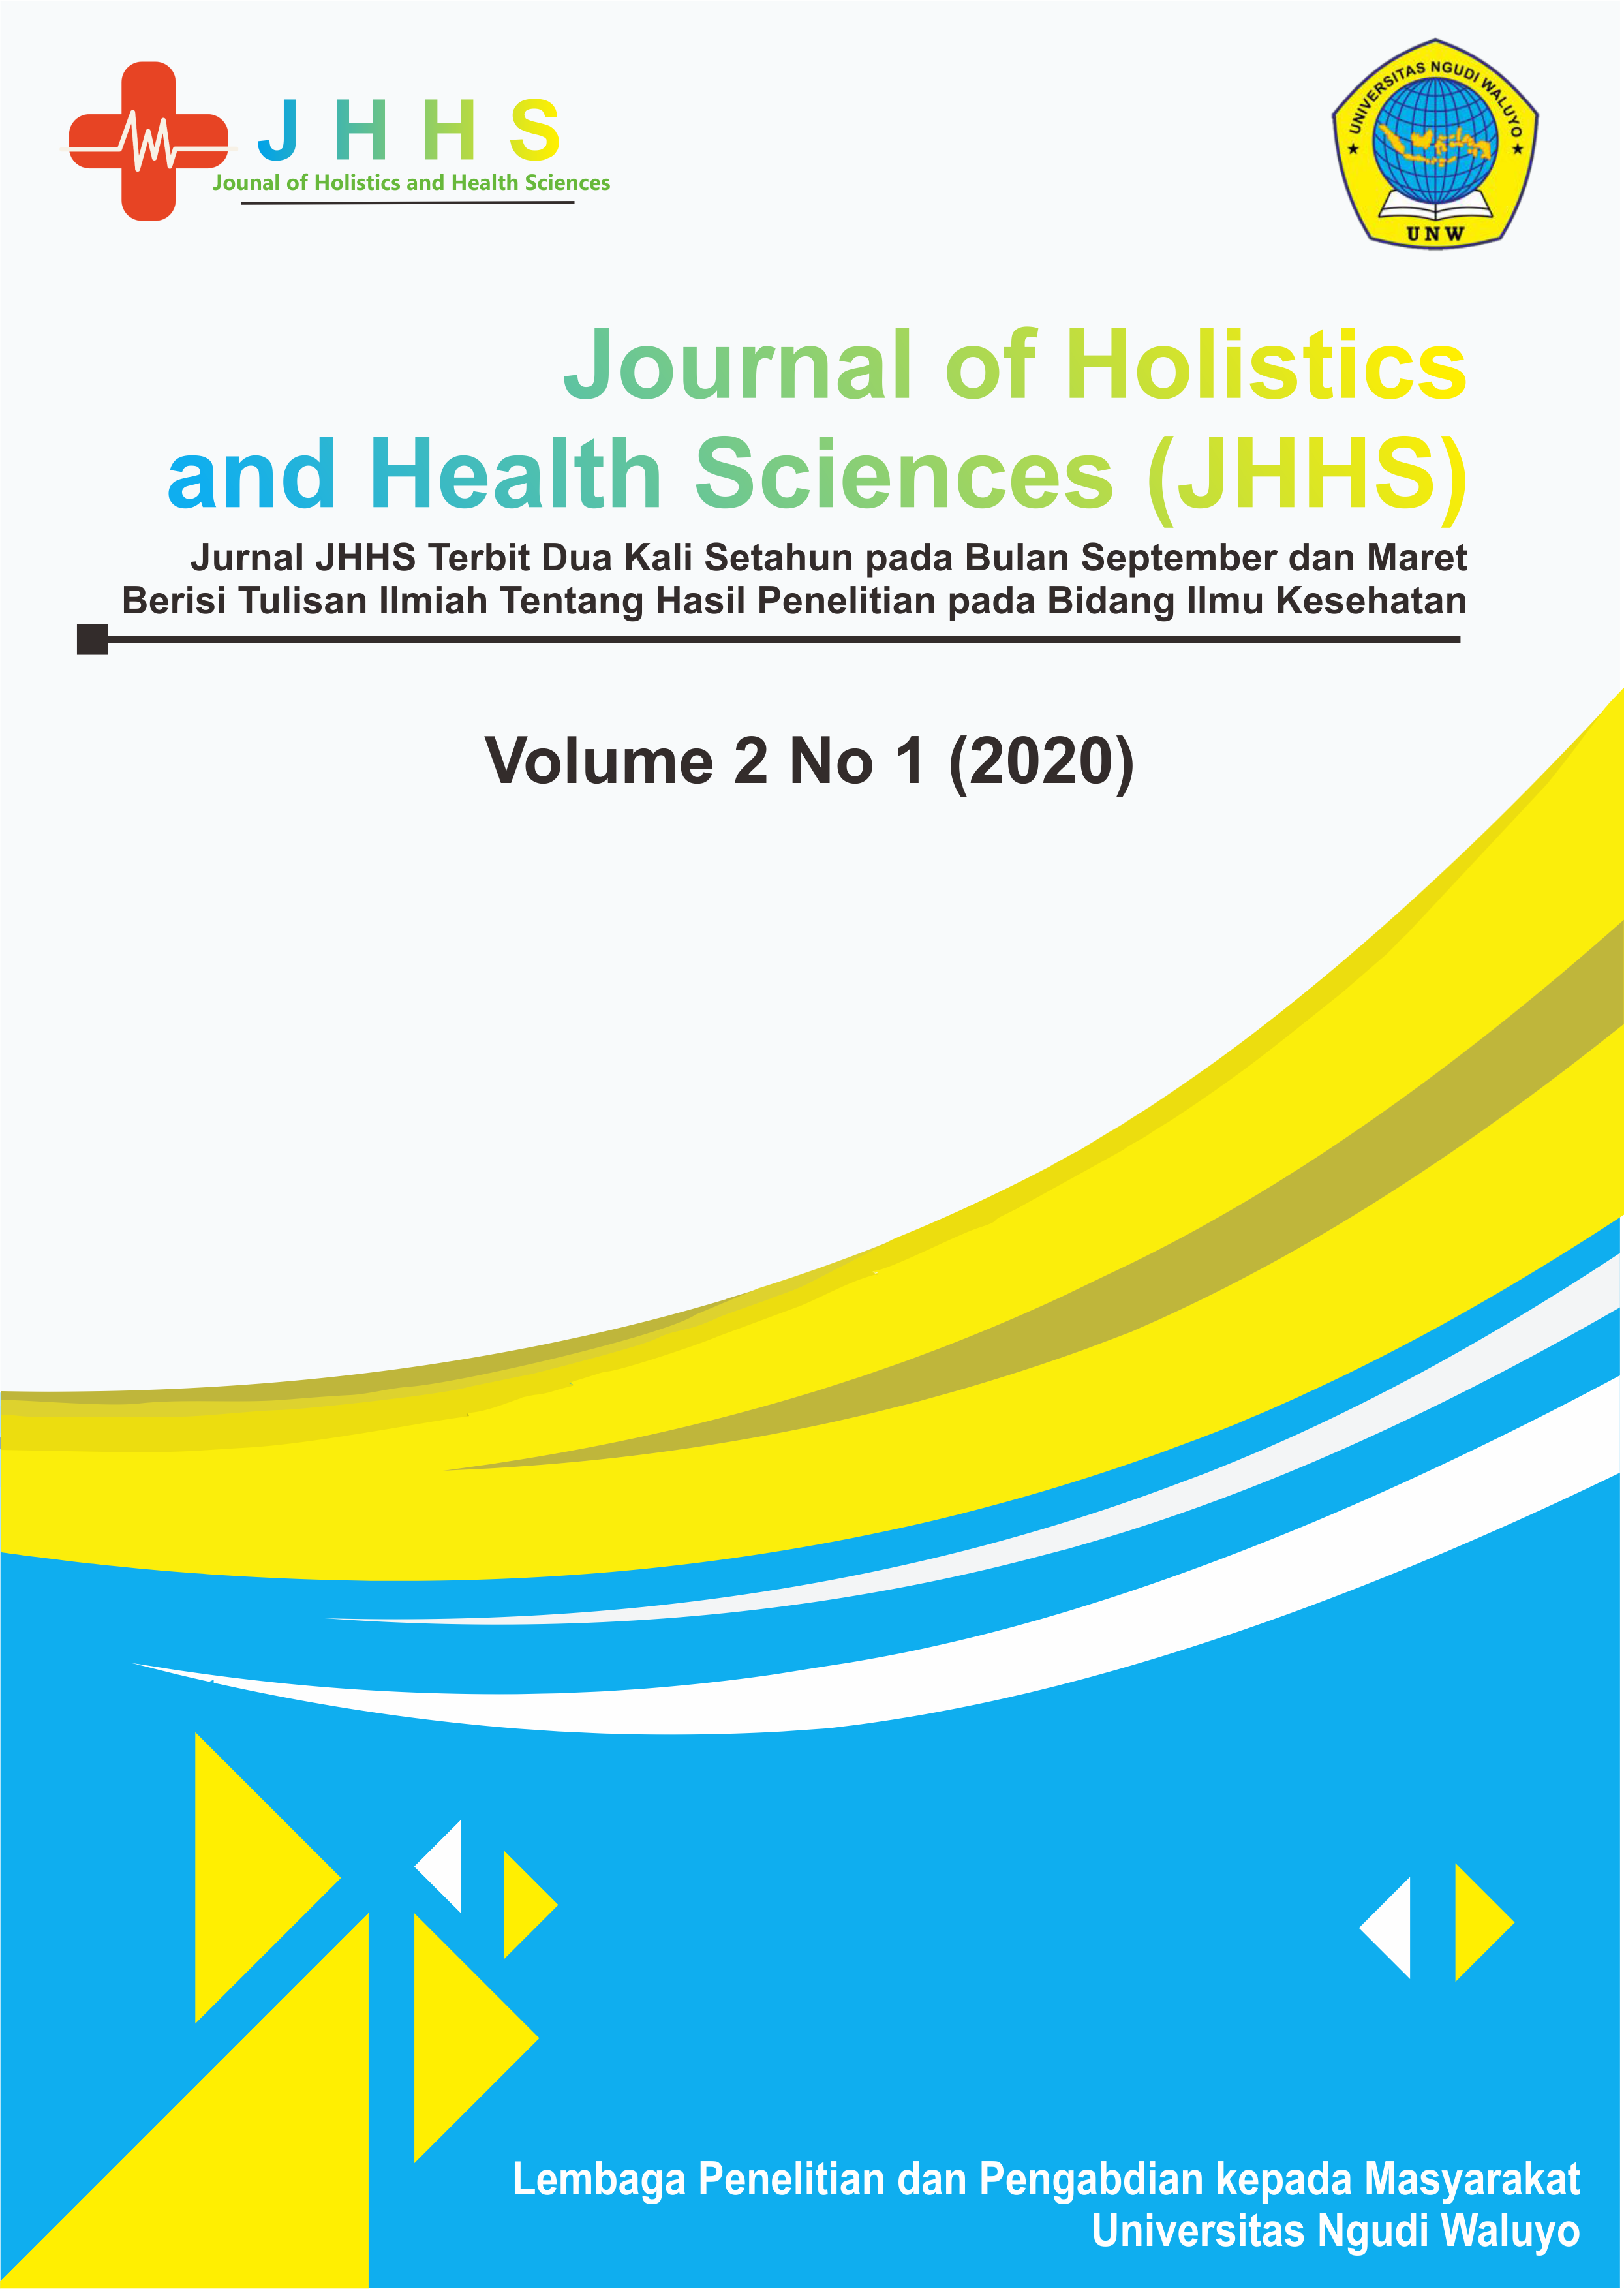 					View Vol. 2 No. 1 (2020): Journal of Holistics and Health Science (JHHS), Maret
				